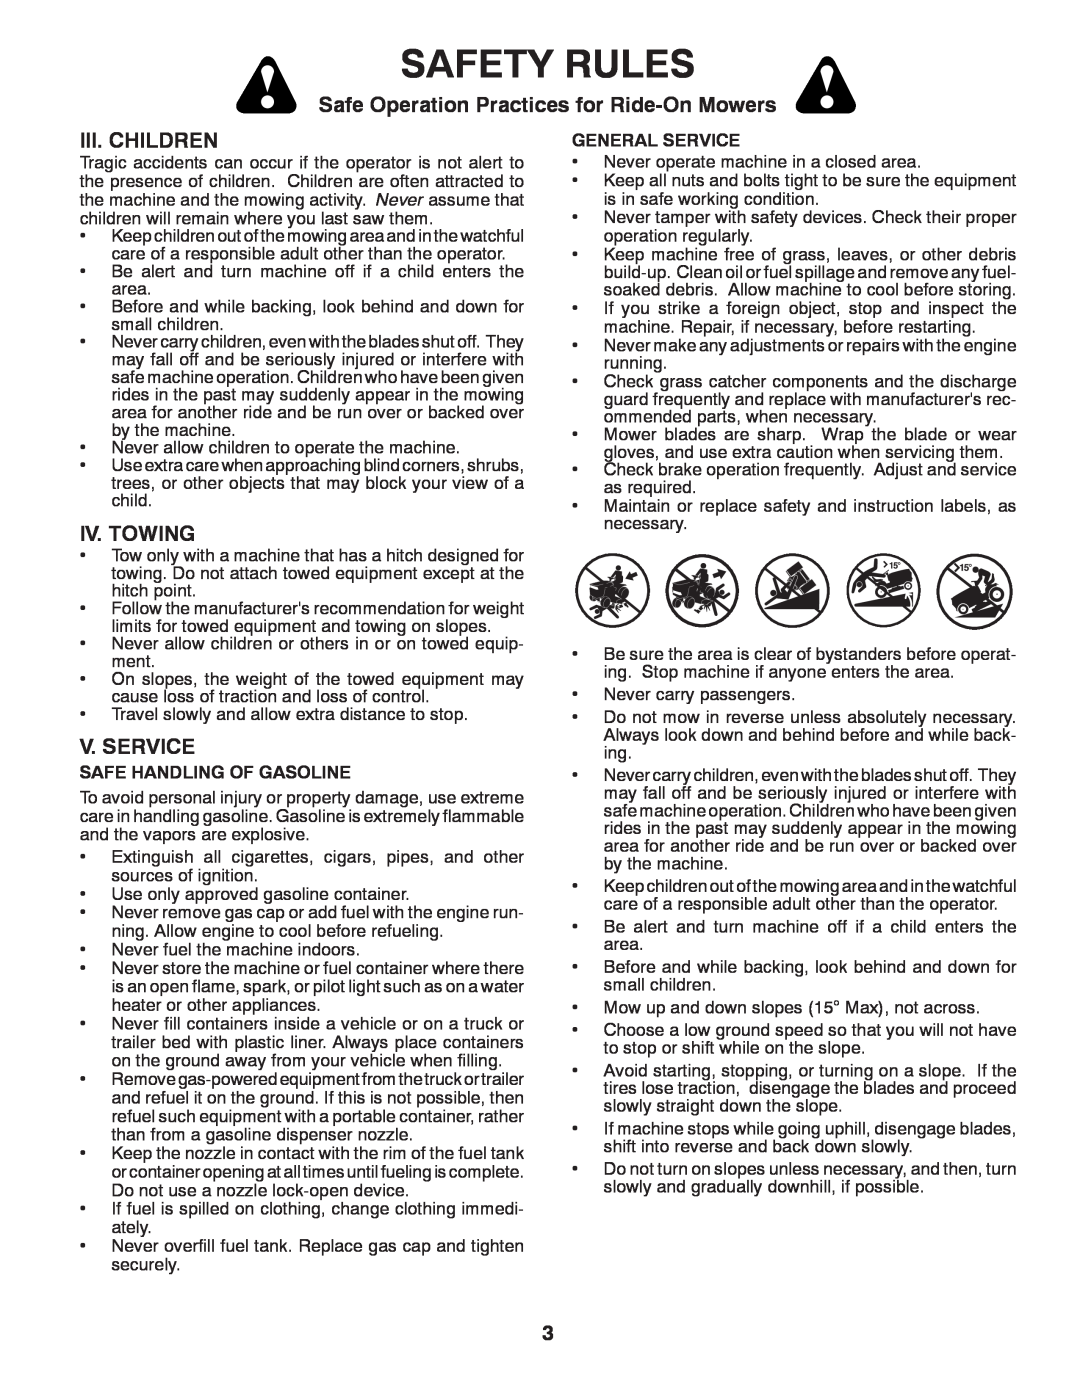 Poulan PB22H46YT manual Iii. Children, Iv. Towing, V. Service, Safety Rules, Safe Operation Practices for Ride-OnMowers 